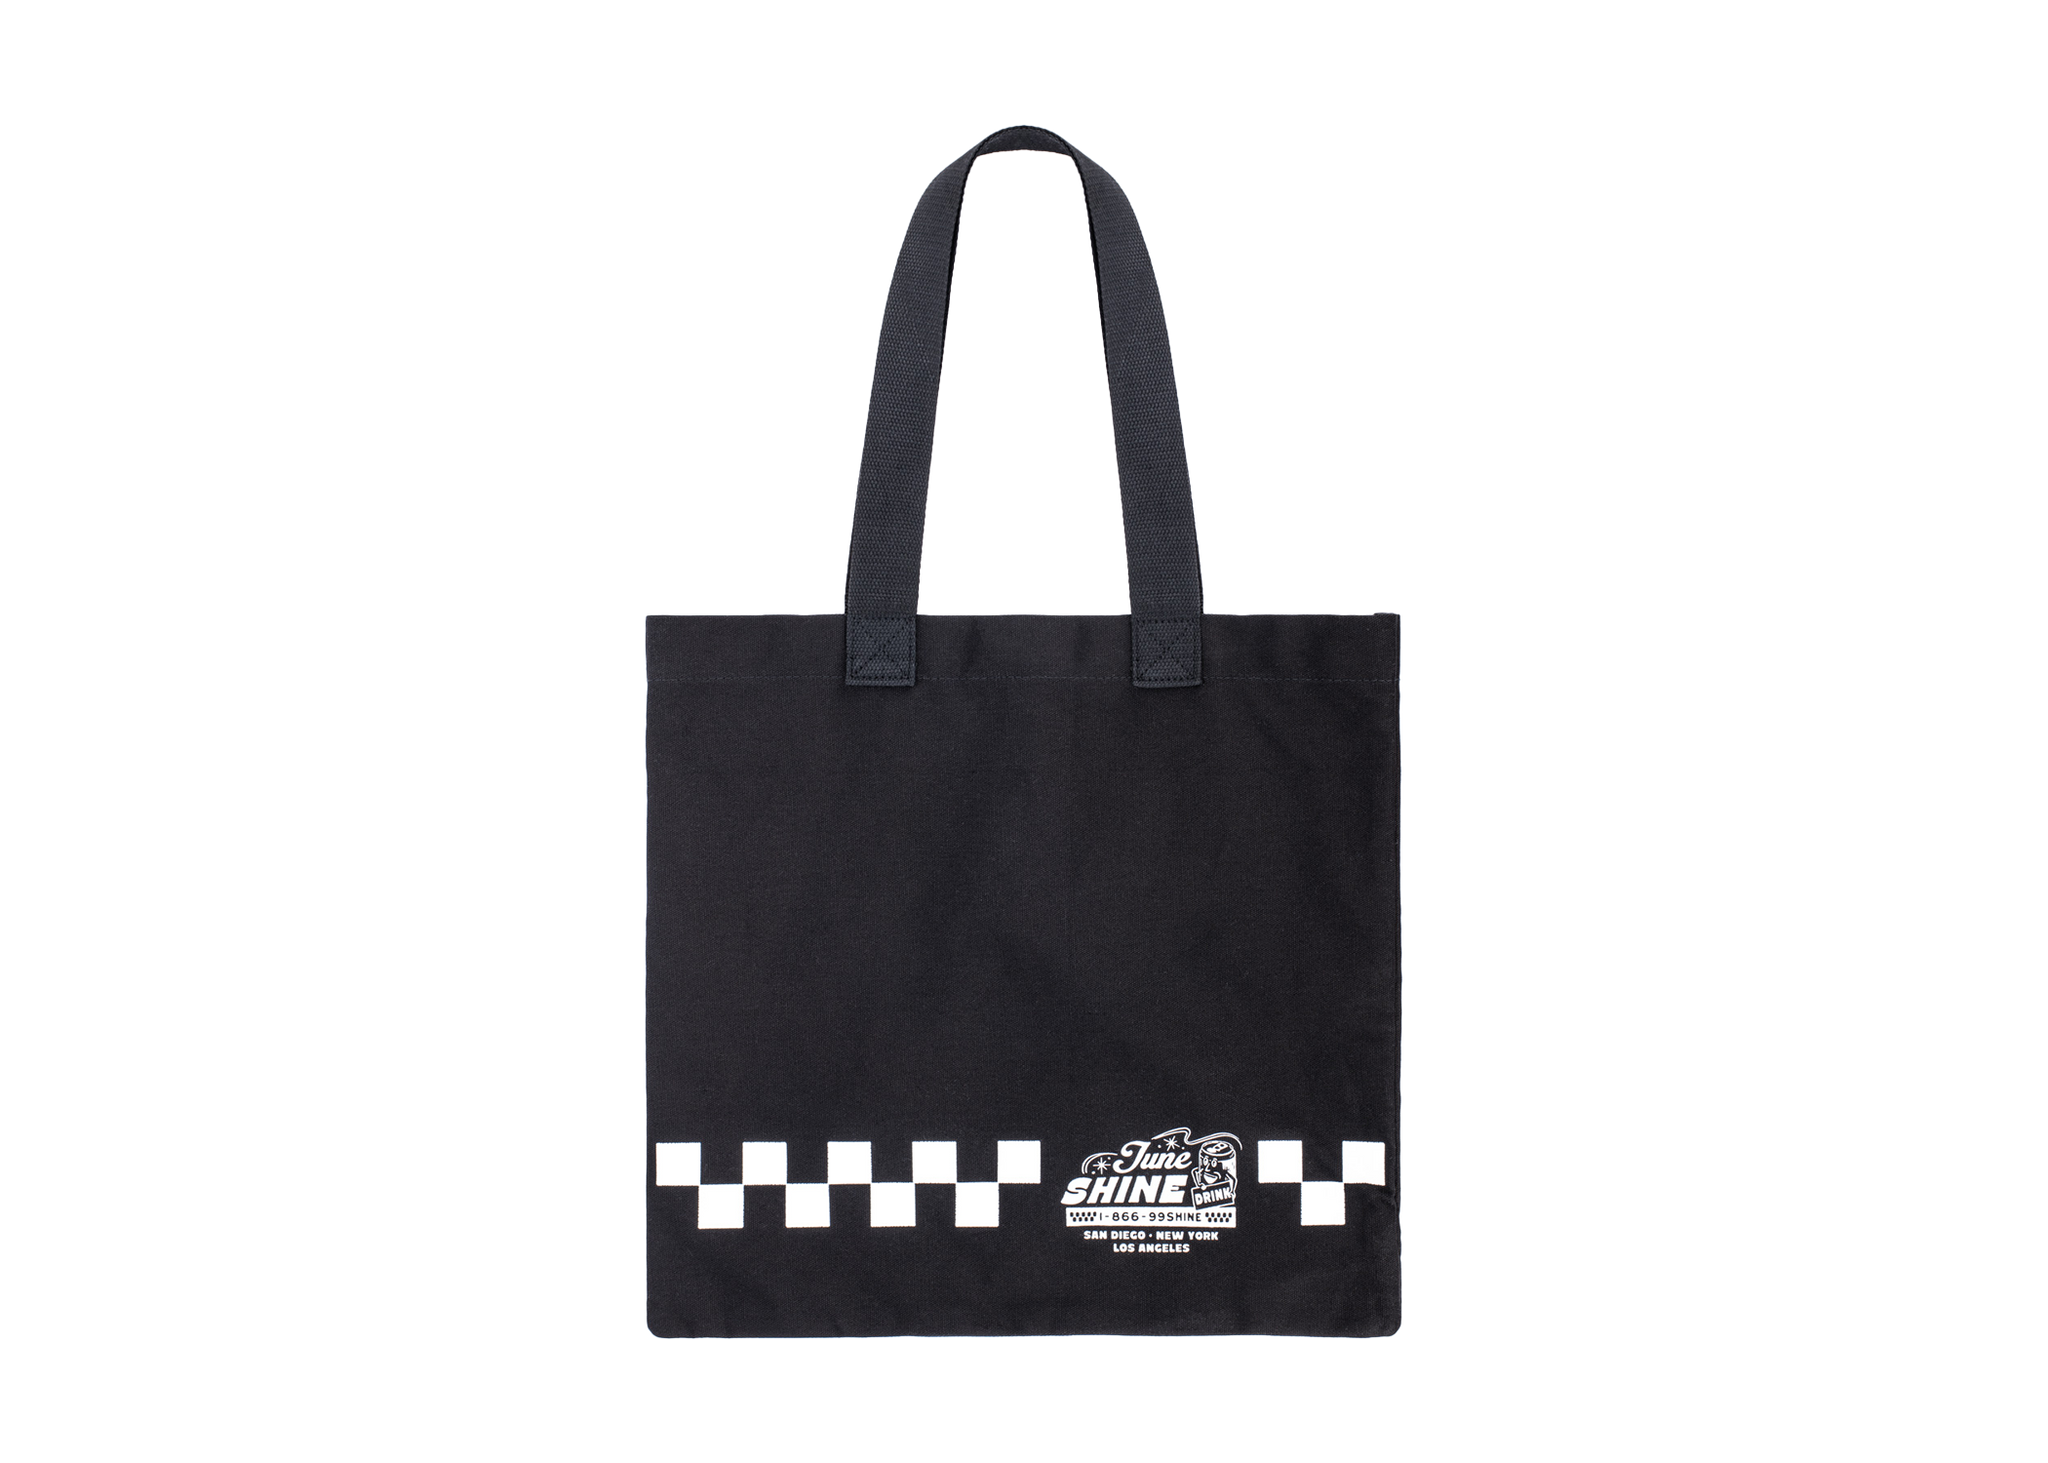 Black canvas tote bag with white checkerboard print and text that reads JuneShine, 1-866-99SHINE San Diego New York Los Angeles